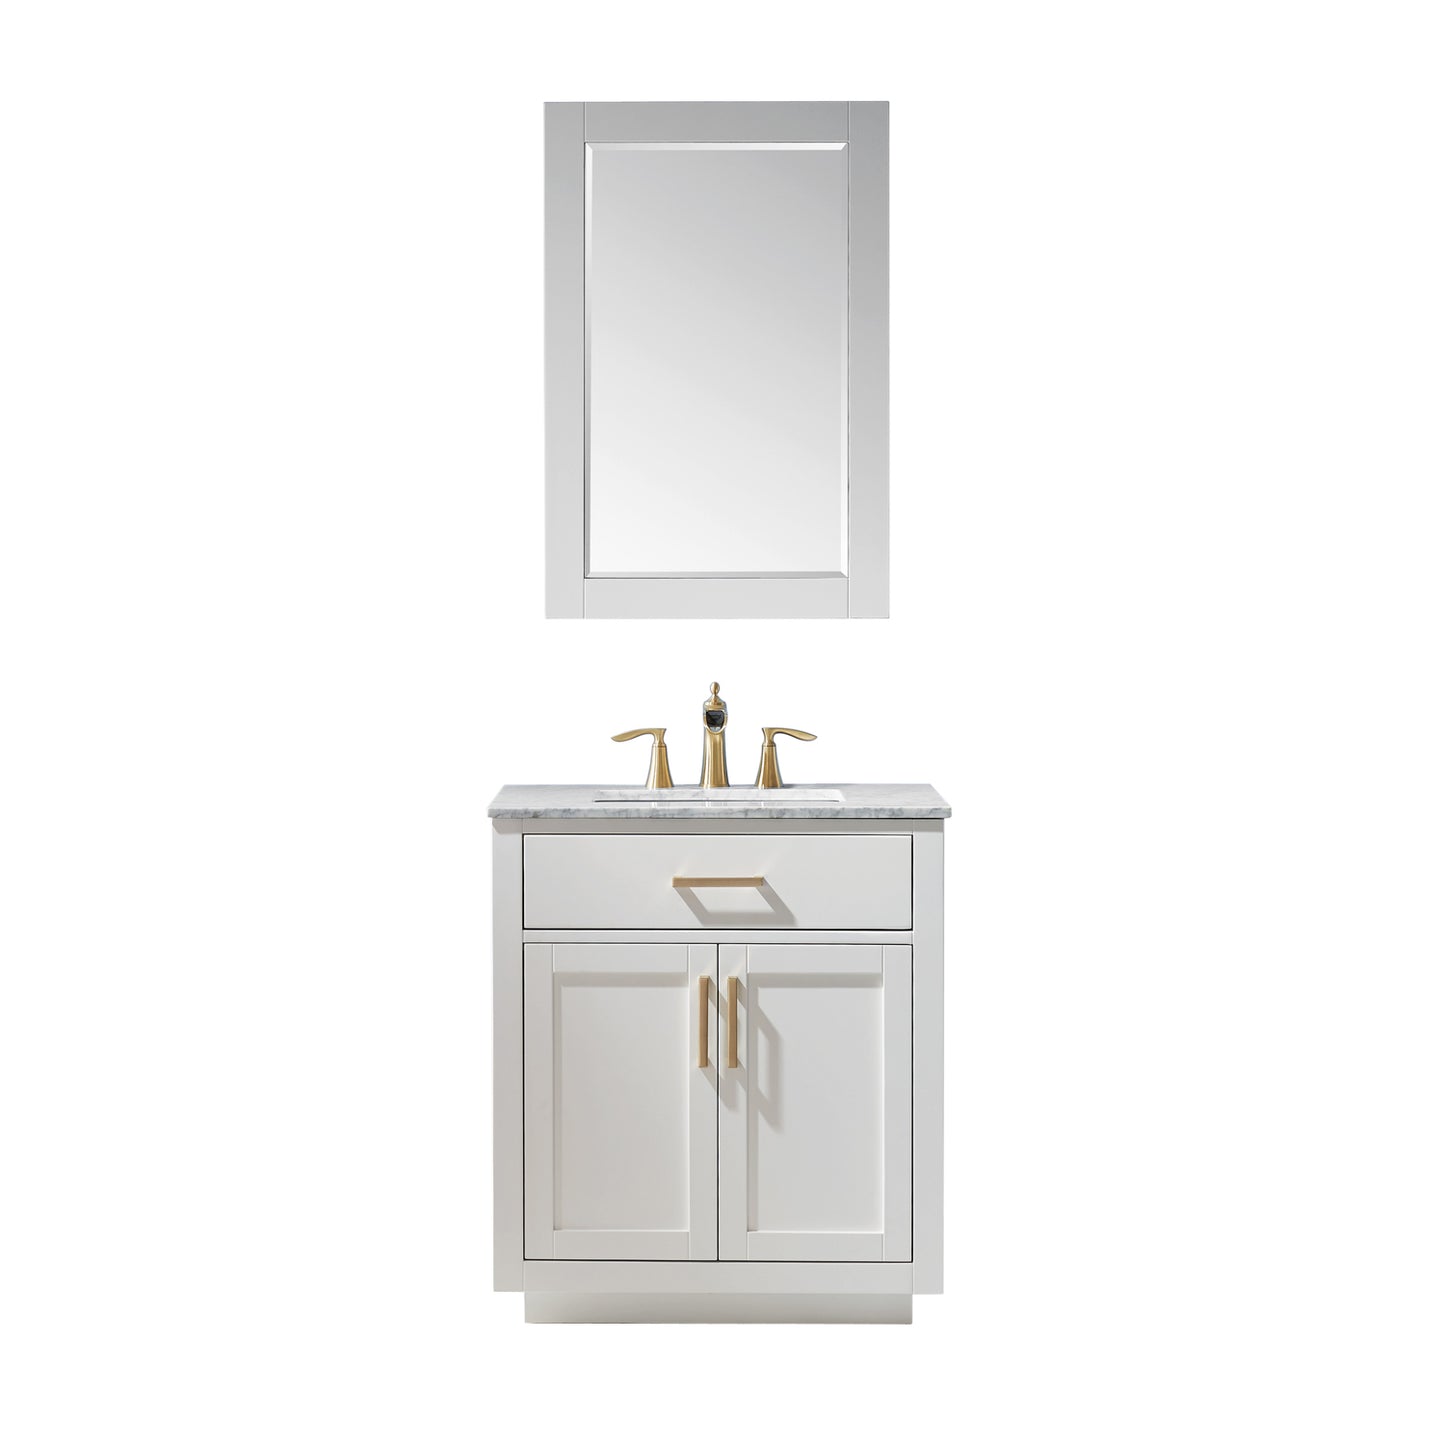 Ivy Single Bathroom Vanity Set in Gray and Carrara White Marble Countertop with Mirror